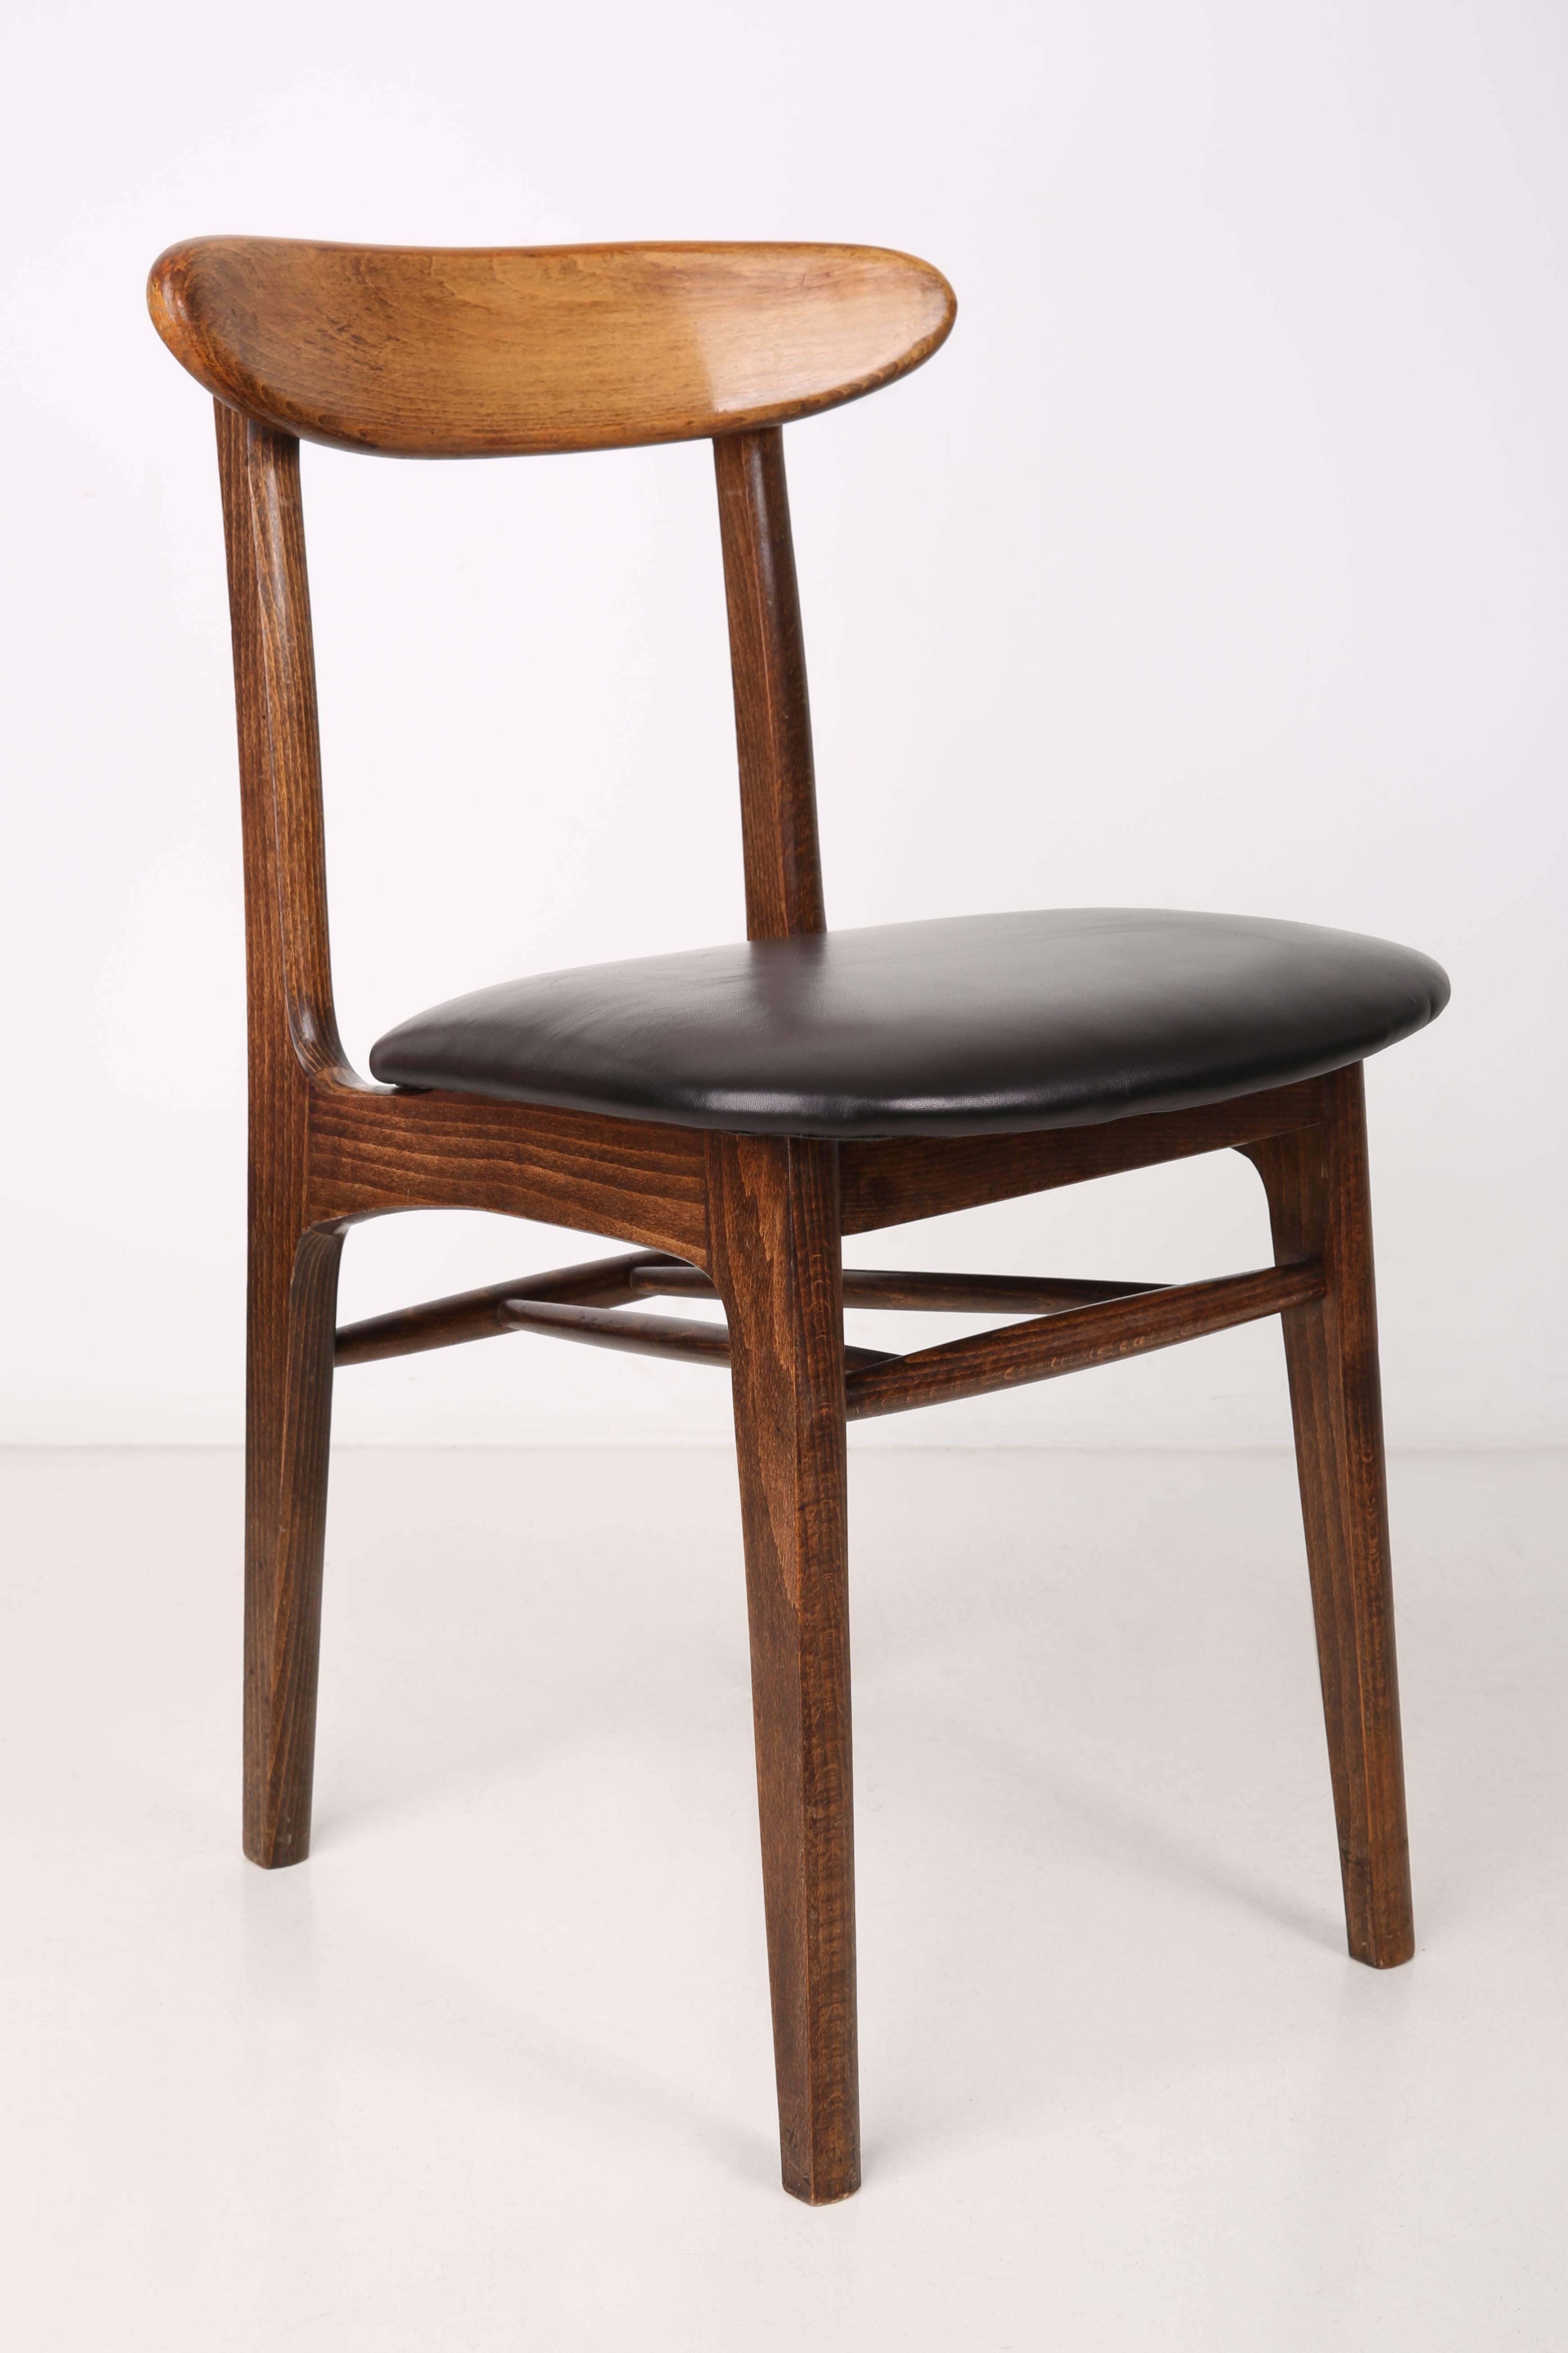 Chairs designed by prof. Rajmund Halas. They have been made of beech wood. They have undergone a complete upholstery renovation, the woodwork has been refreshed. Seats and backs were dressed in black natural cow leather. They are stable and very